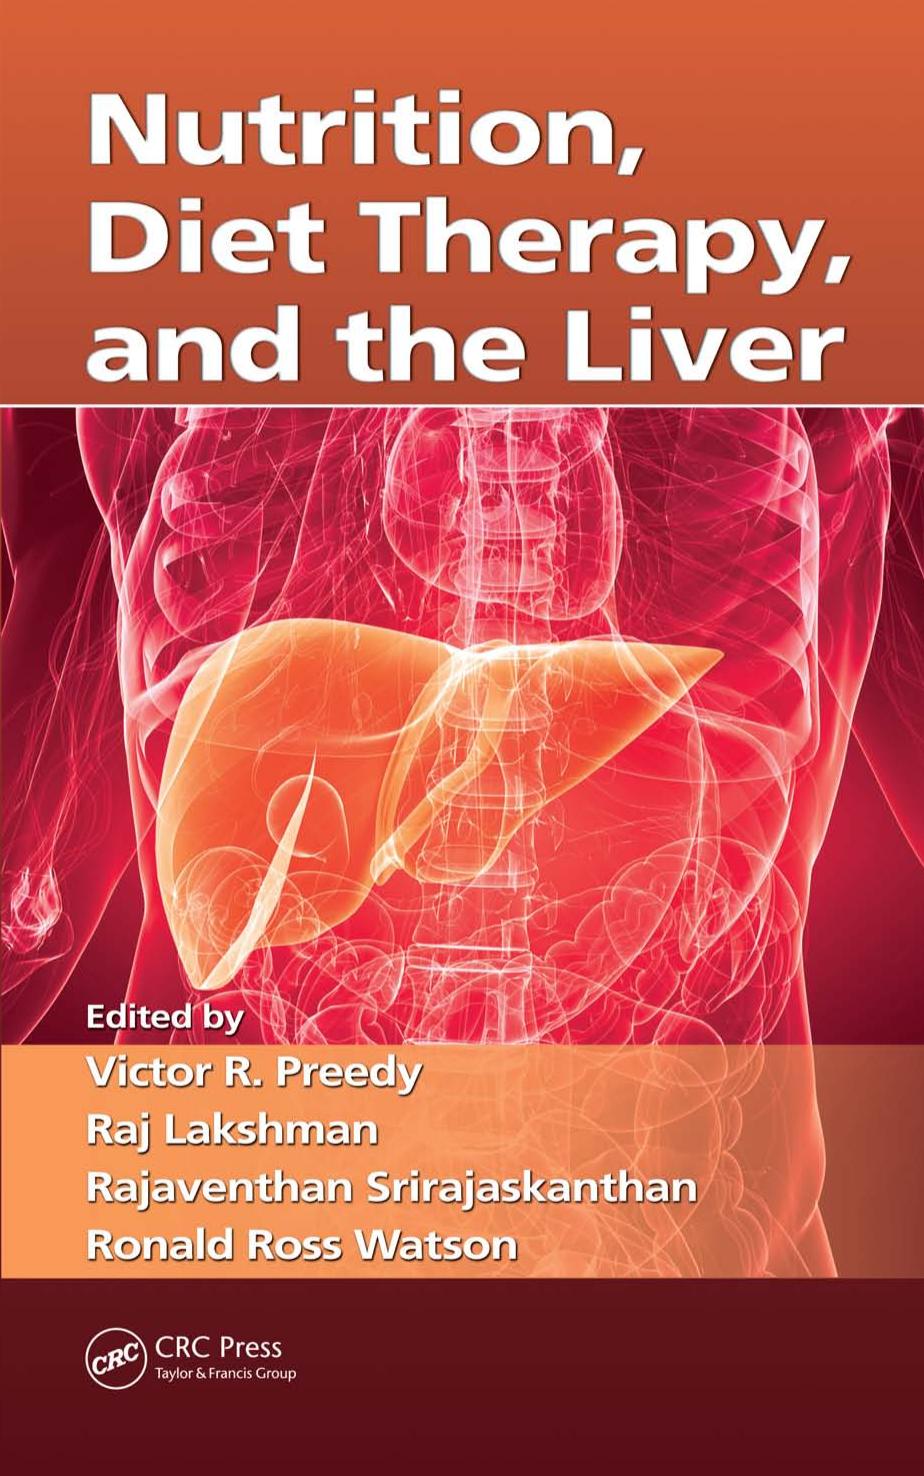 Nutrition, Diet Therapy, and the Liver 2010